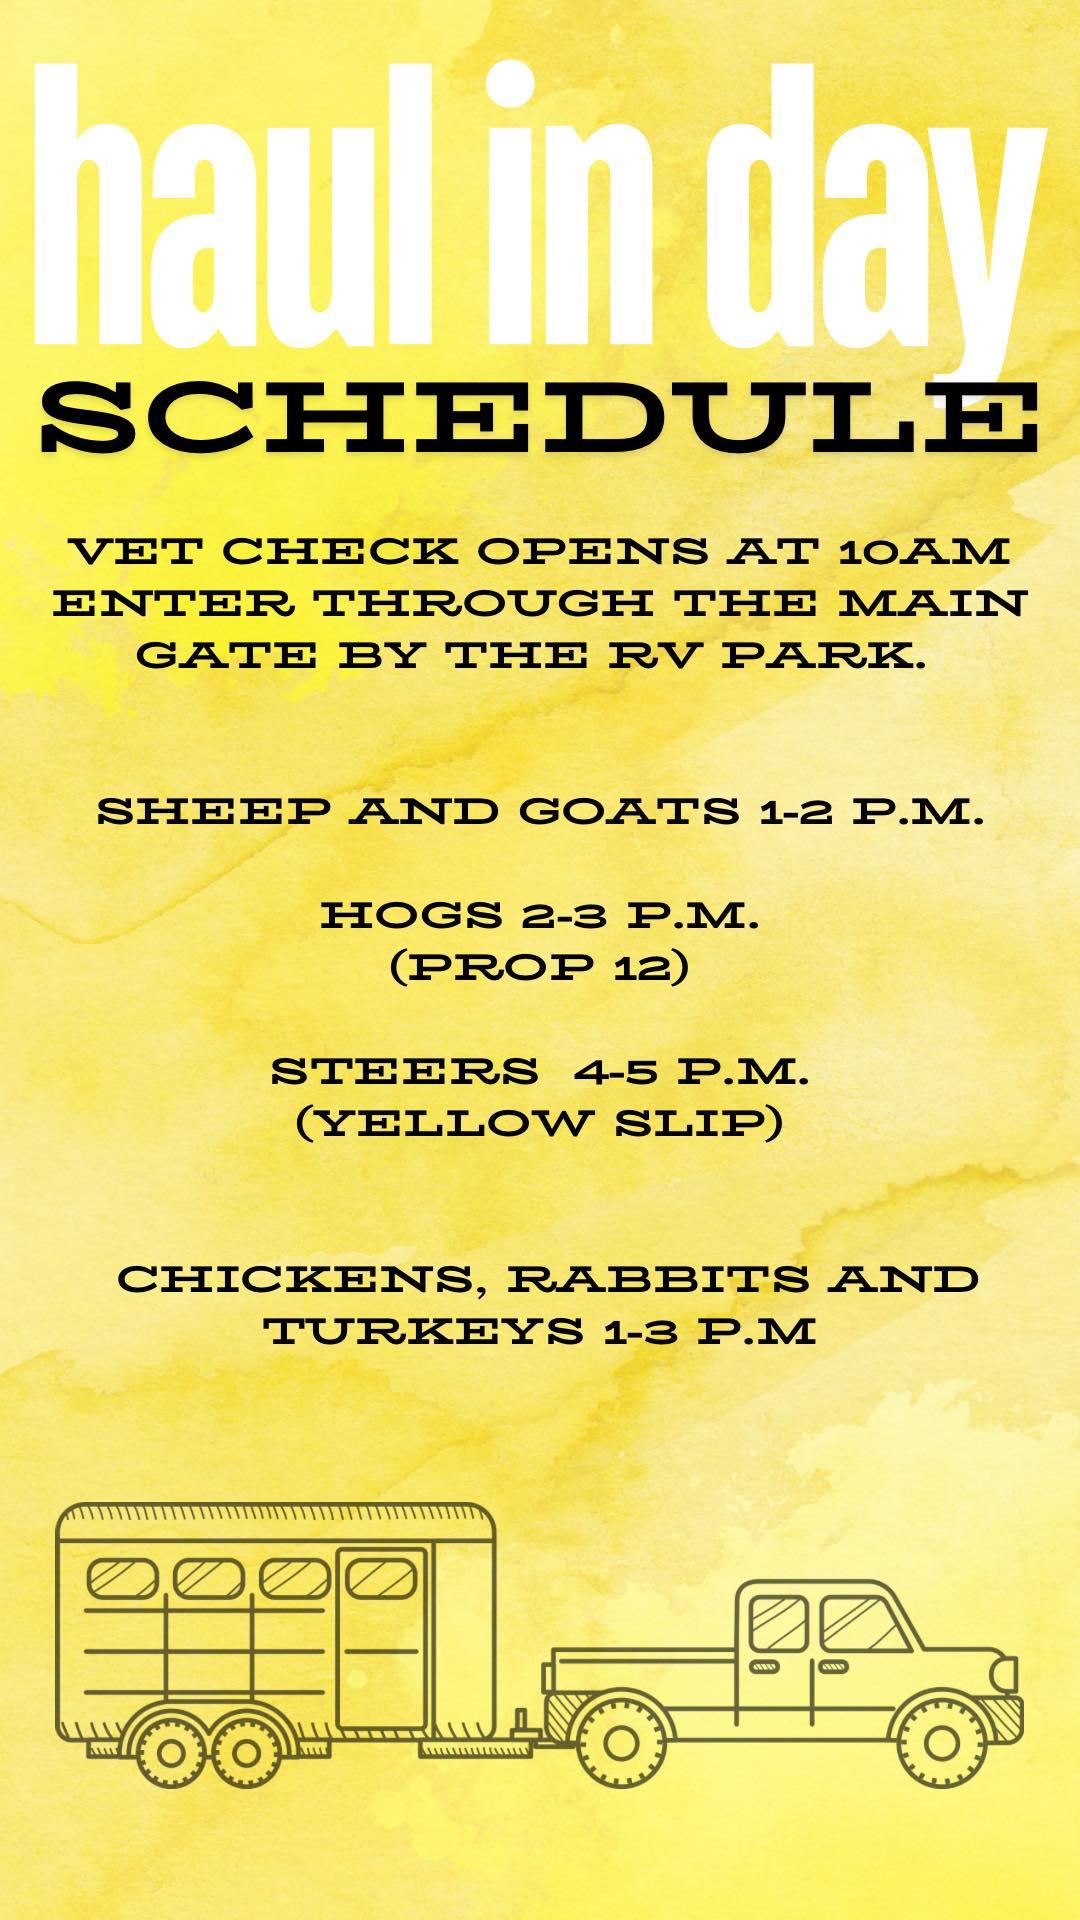 Haul in day schedule. Vet check opens at 10a enter thru the main gate by the rv park. Sheep & goats 1-2p Hogs 2-3p (prop 12) Steers 4-5p (yellow slip)